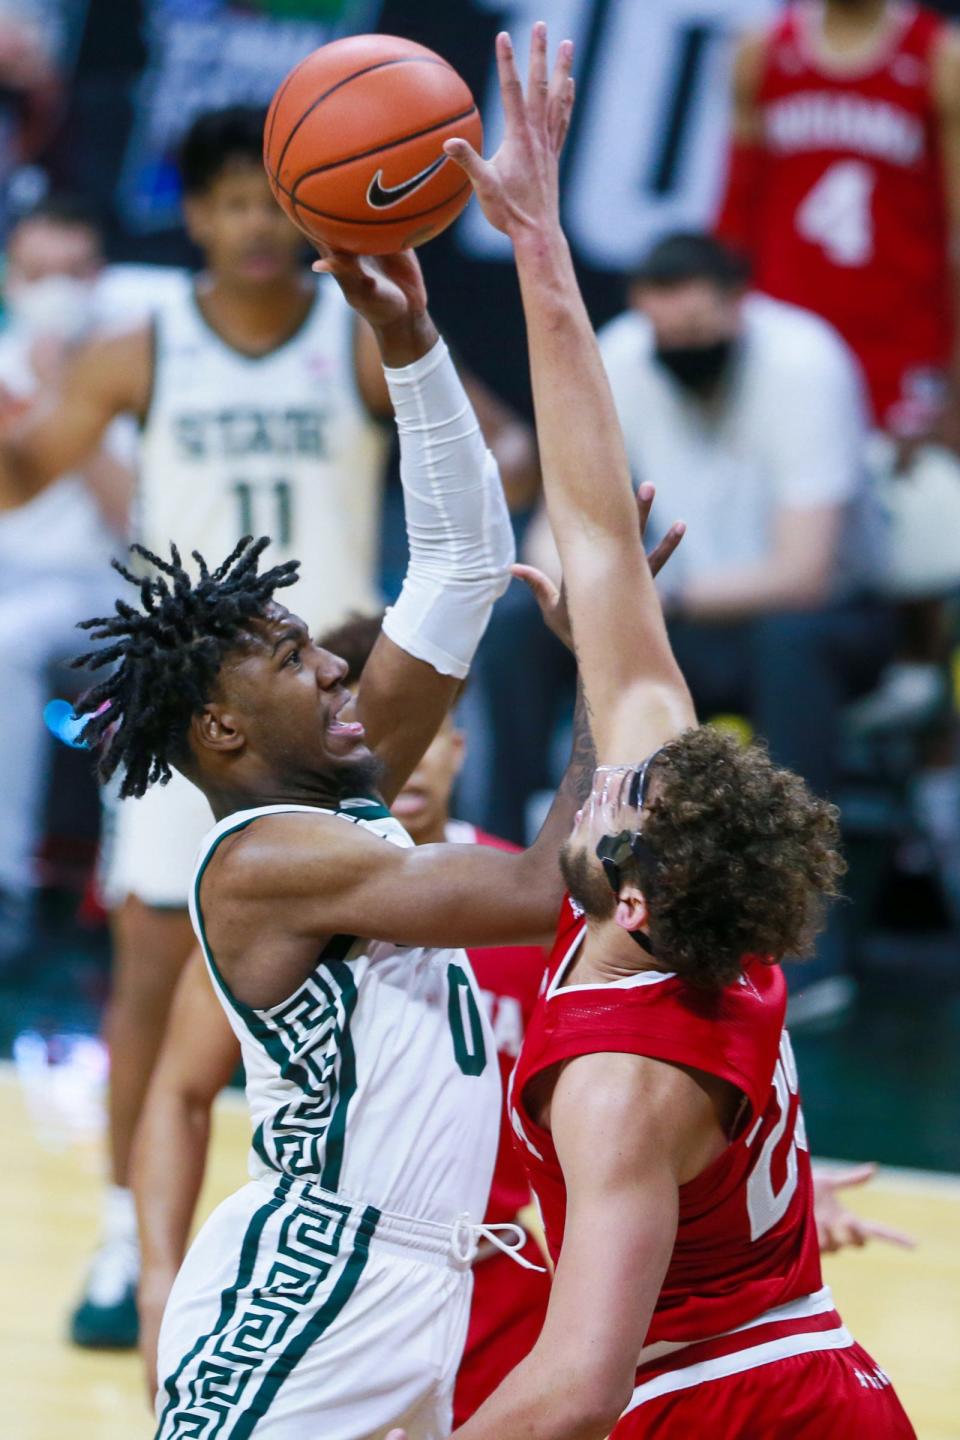 Michigan State forward Aaron Henry (0) is blocked by Indiana forward Race Thompson (25) in the first half against Indiana on Tuesday, March 2, 2021, in East Lansing.